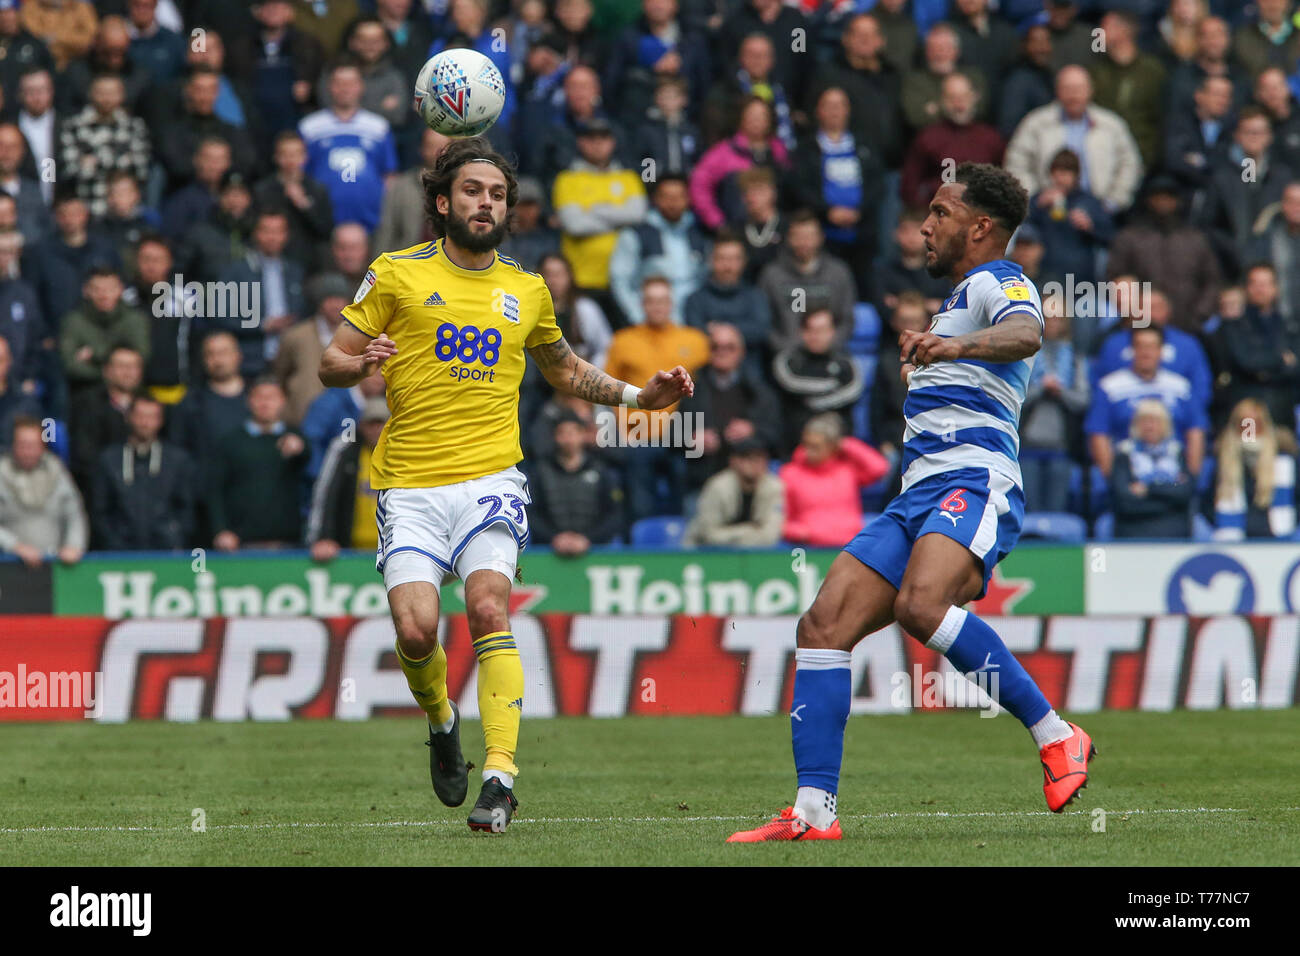 Reading, UK. 05th May, 2019. Sky Bet Championship, Reading vs Birmingham City ; Liam Moore (06) of Reading clears the ball ahead of Jota (23) of Birmingham Credit: Matt O'Connor/News Images, English Football League images are subject to DataCo Licence Credit: News Images /Alamy Live News Stock Photo